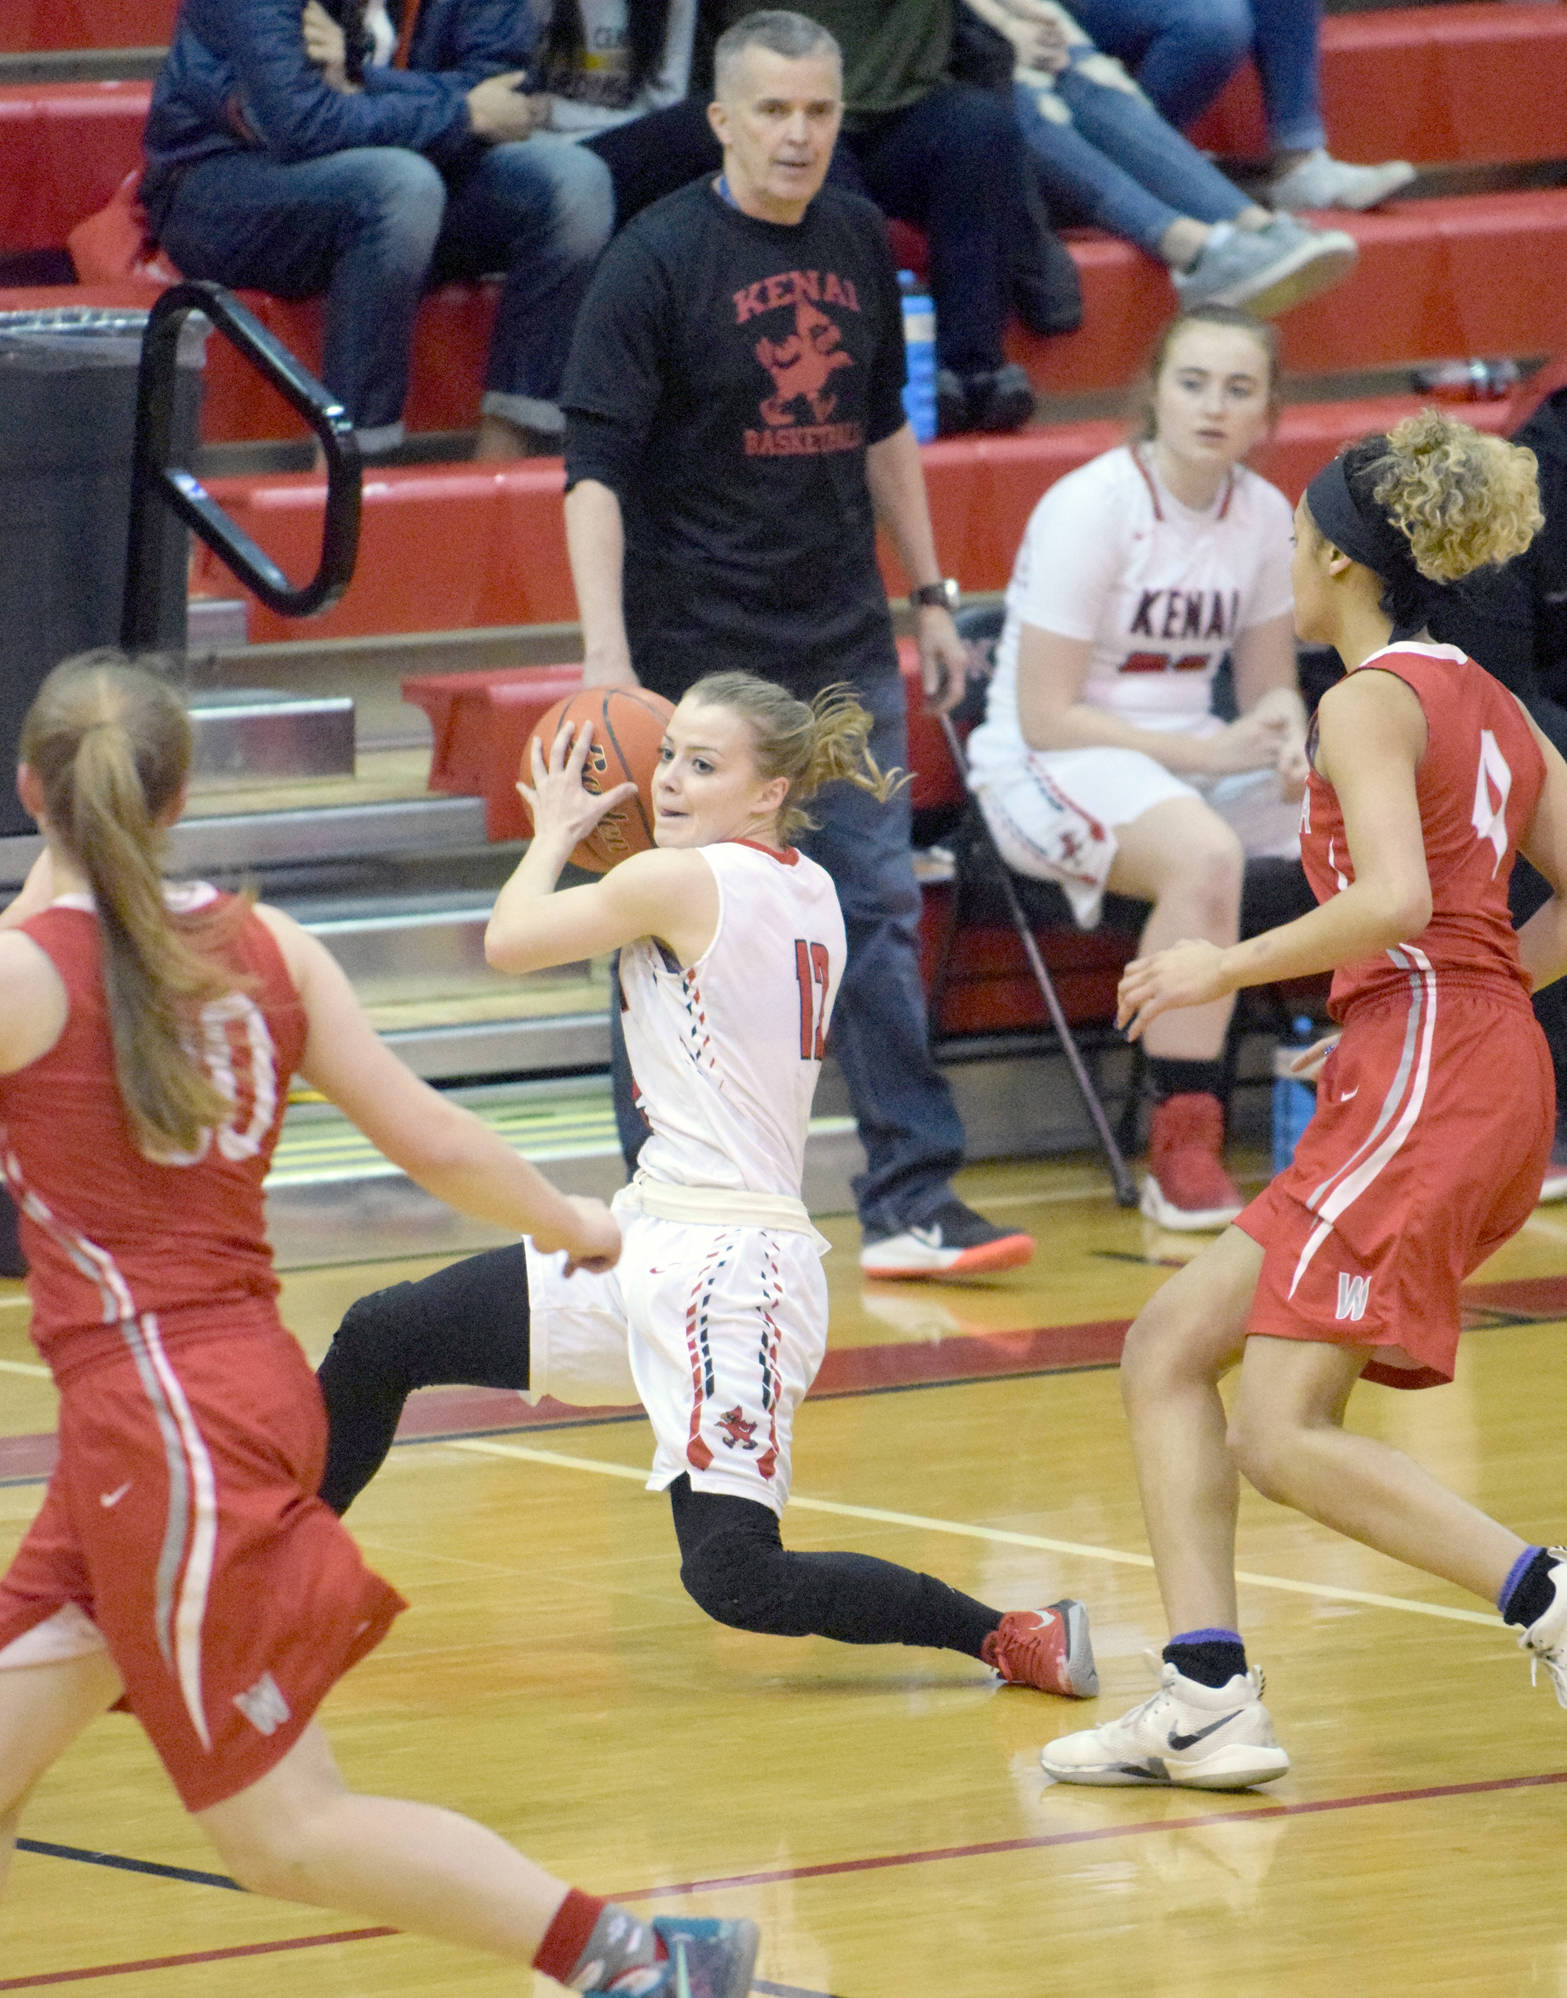 Kenai Central’s Hayley Maw works against the Wasilla press Wednesday, Feb. 14, 2018, on Cliff Massie at Kenai Central High School. (Photo by Jeff Helminiak/Peninsula Clarion)